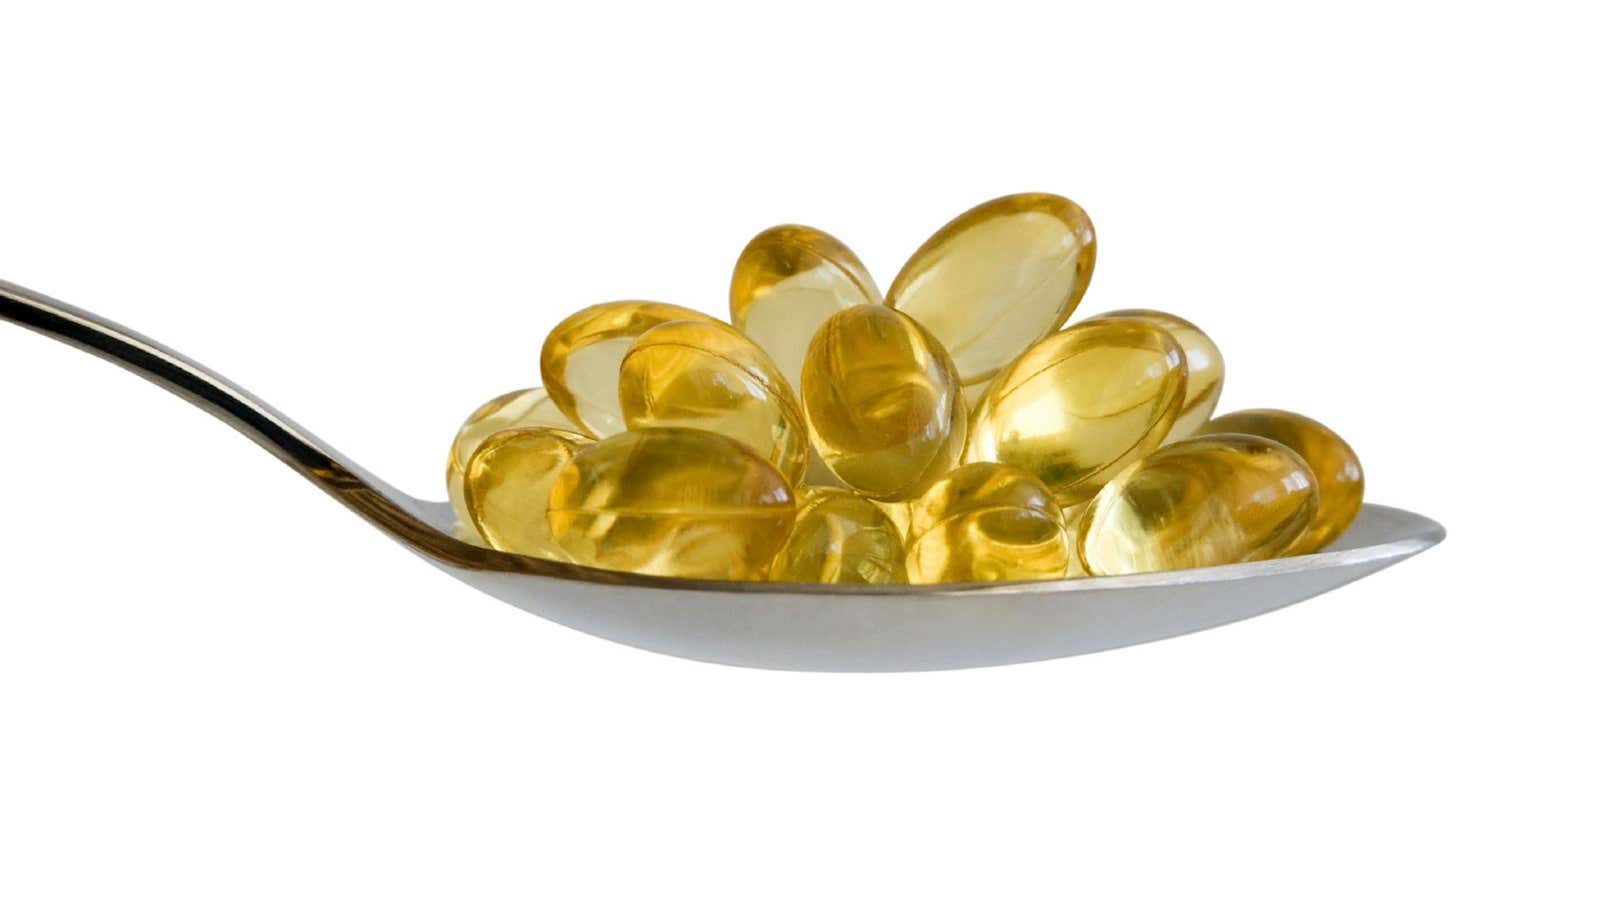 The effectiveness of this supplement is still a fishy issue.